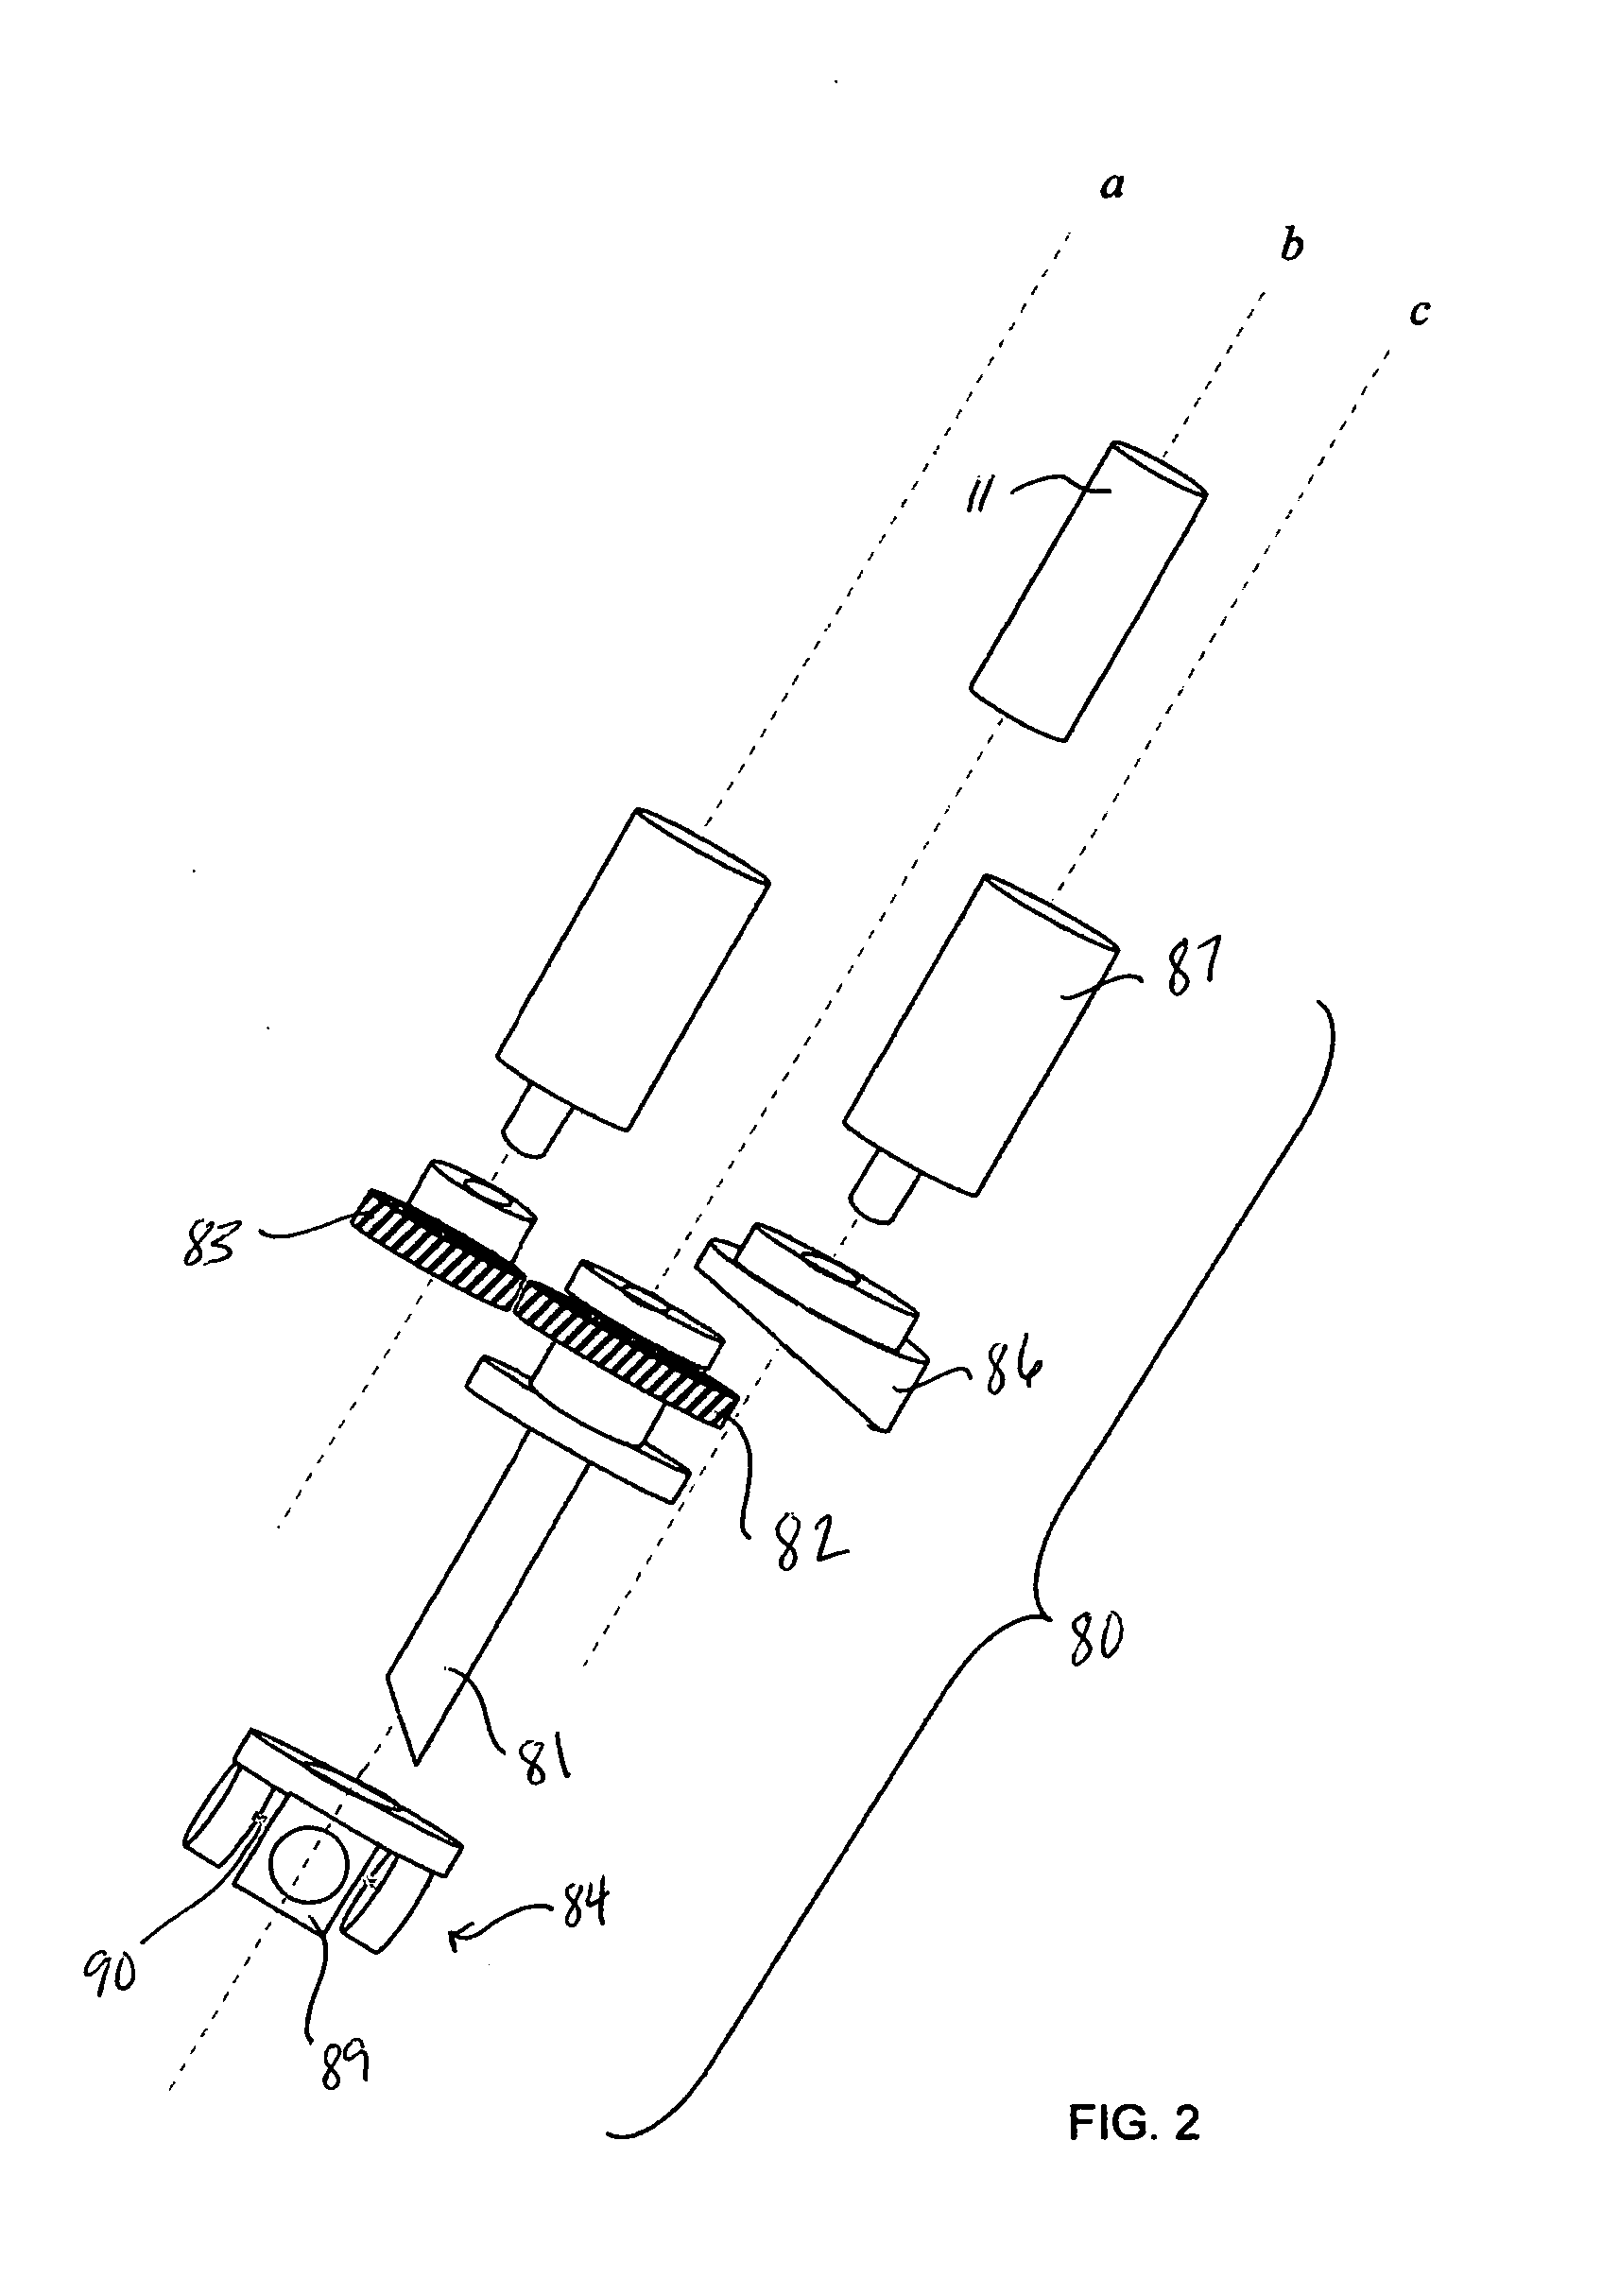 Stand-alone scanning laser device